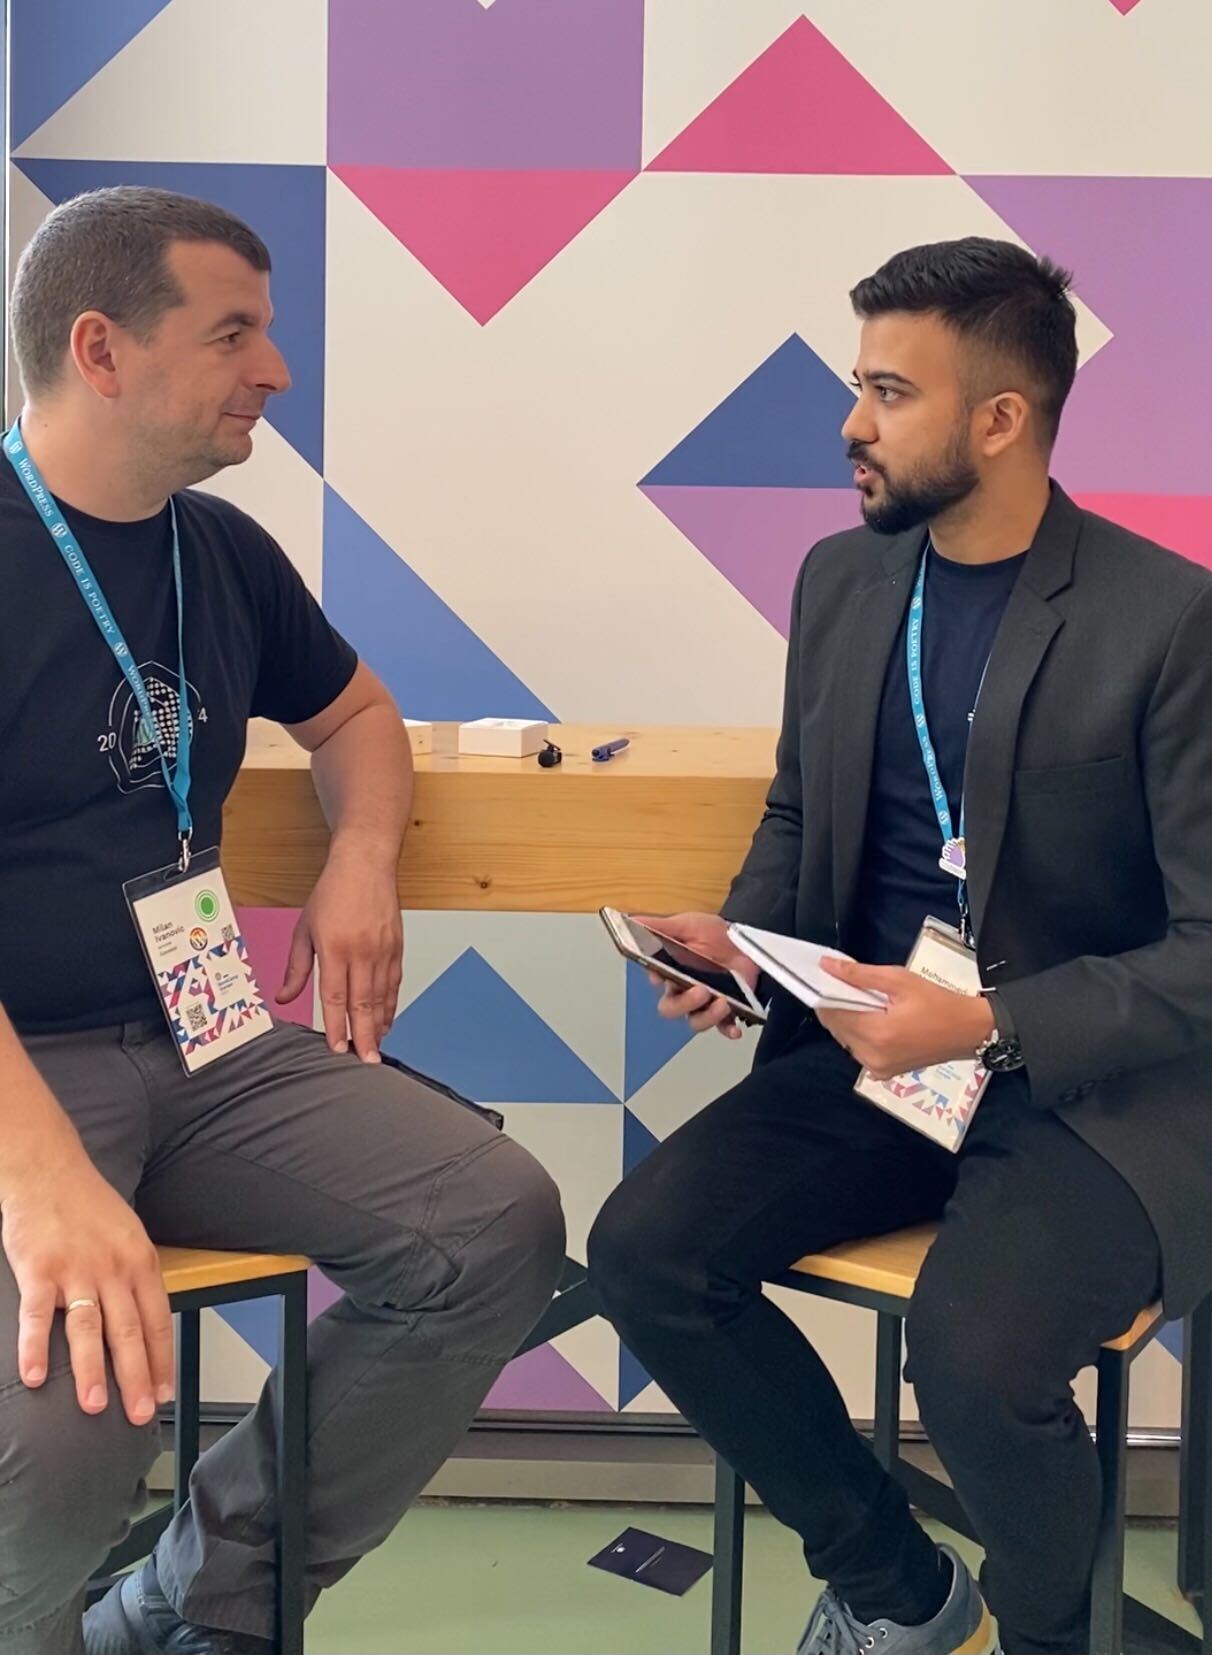 Cloudways community team lead, Mohammed Moeez, having a chat with Milan Ivanovic.